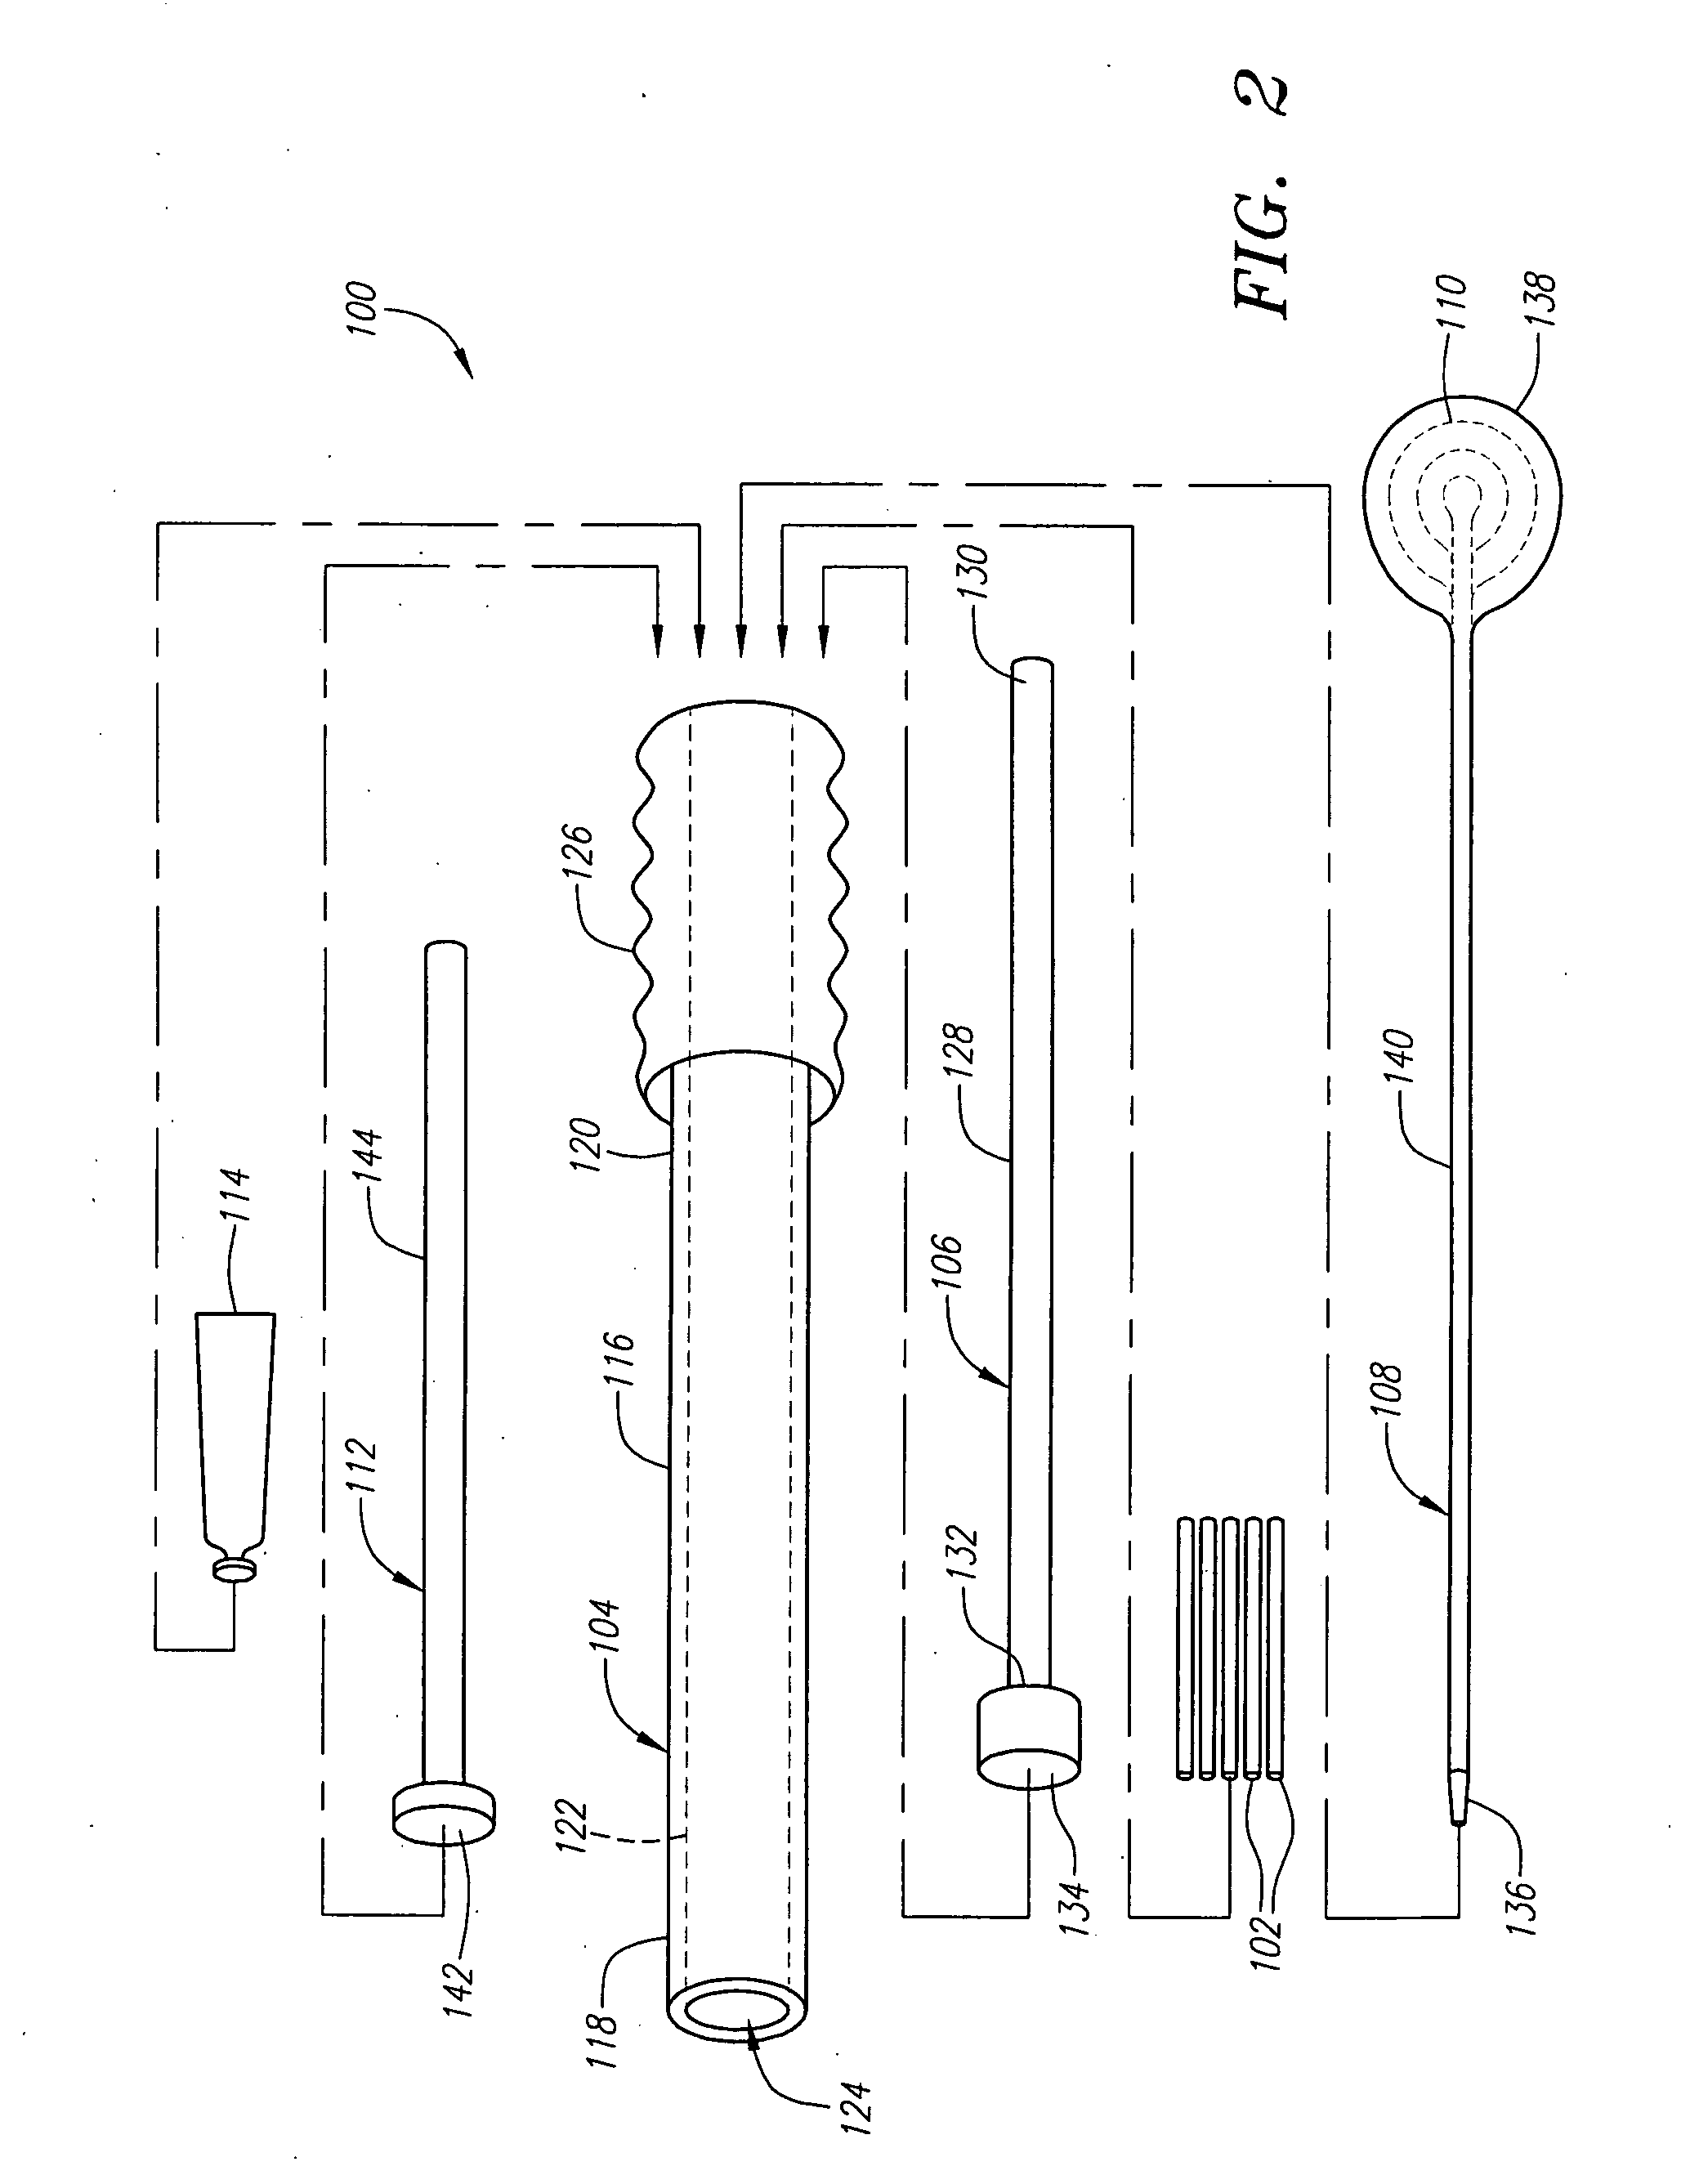 Biocompatible wires and methods of using same to fill bone void